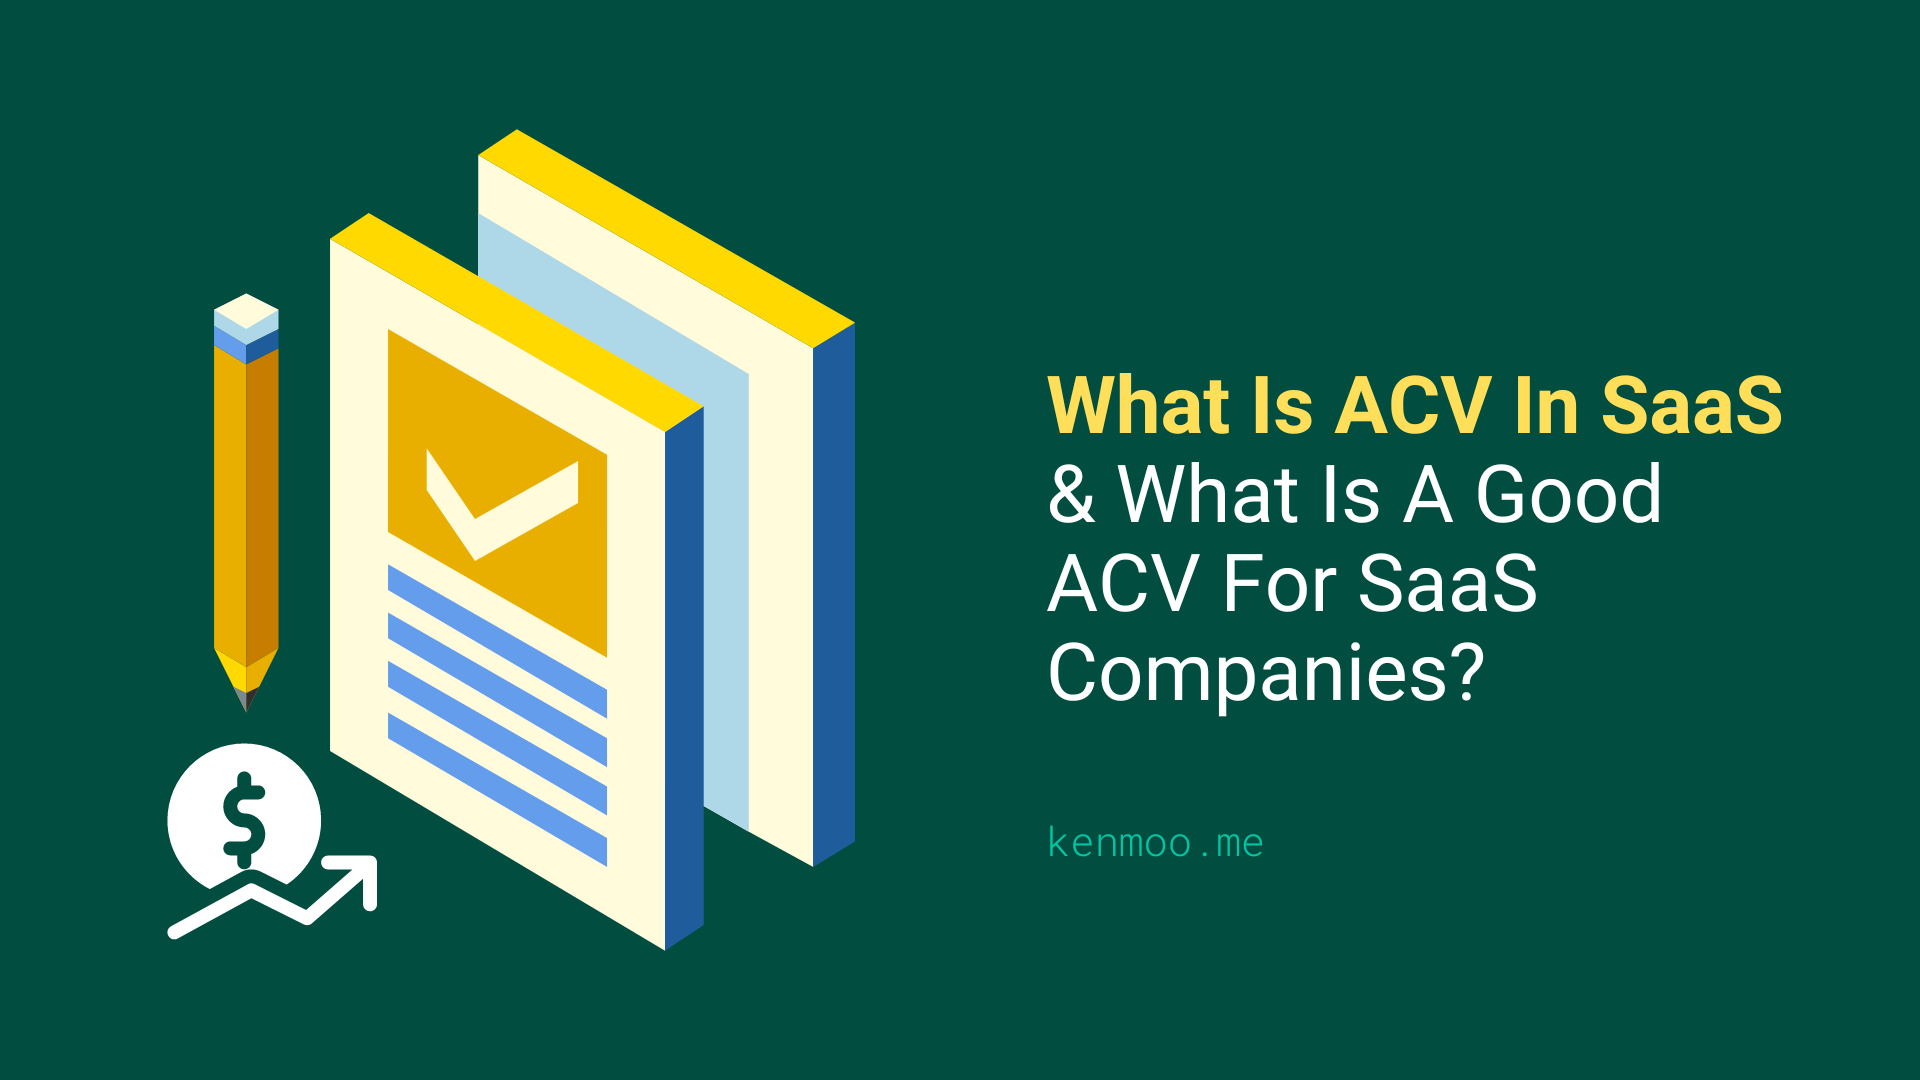 What Is ACV In SaaS & What Is A Good ACV For SaaS Companies?